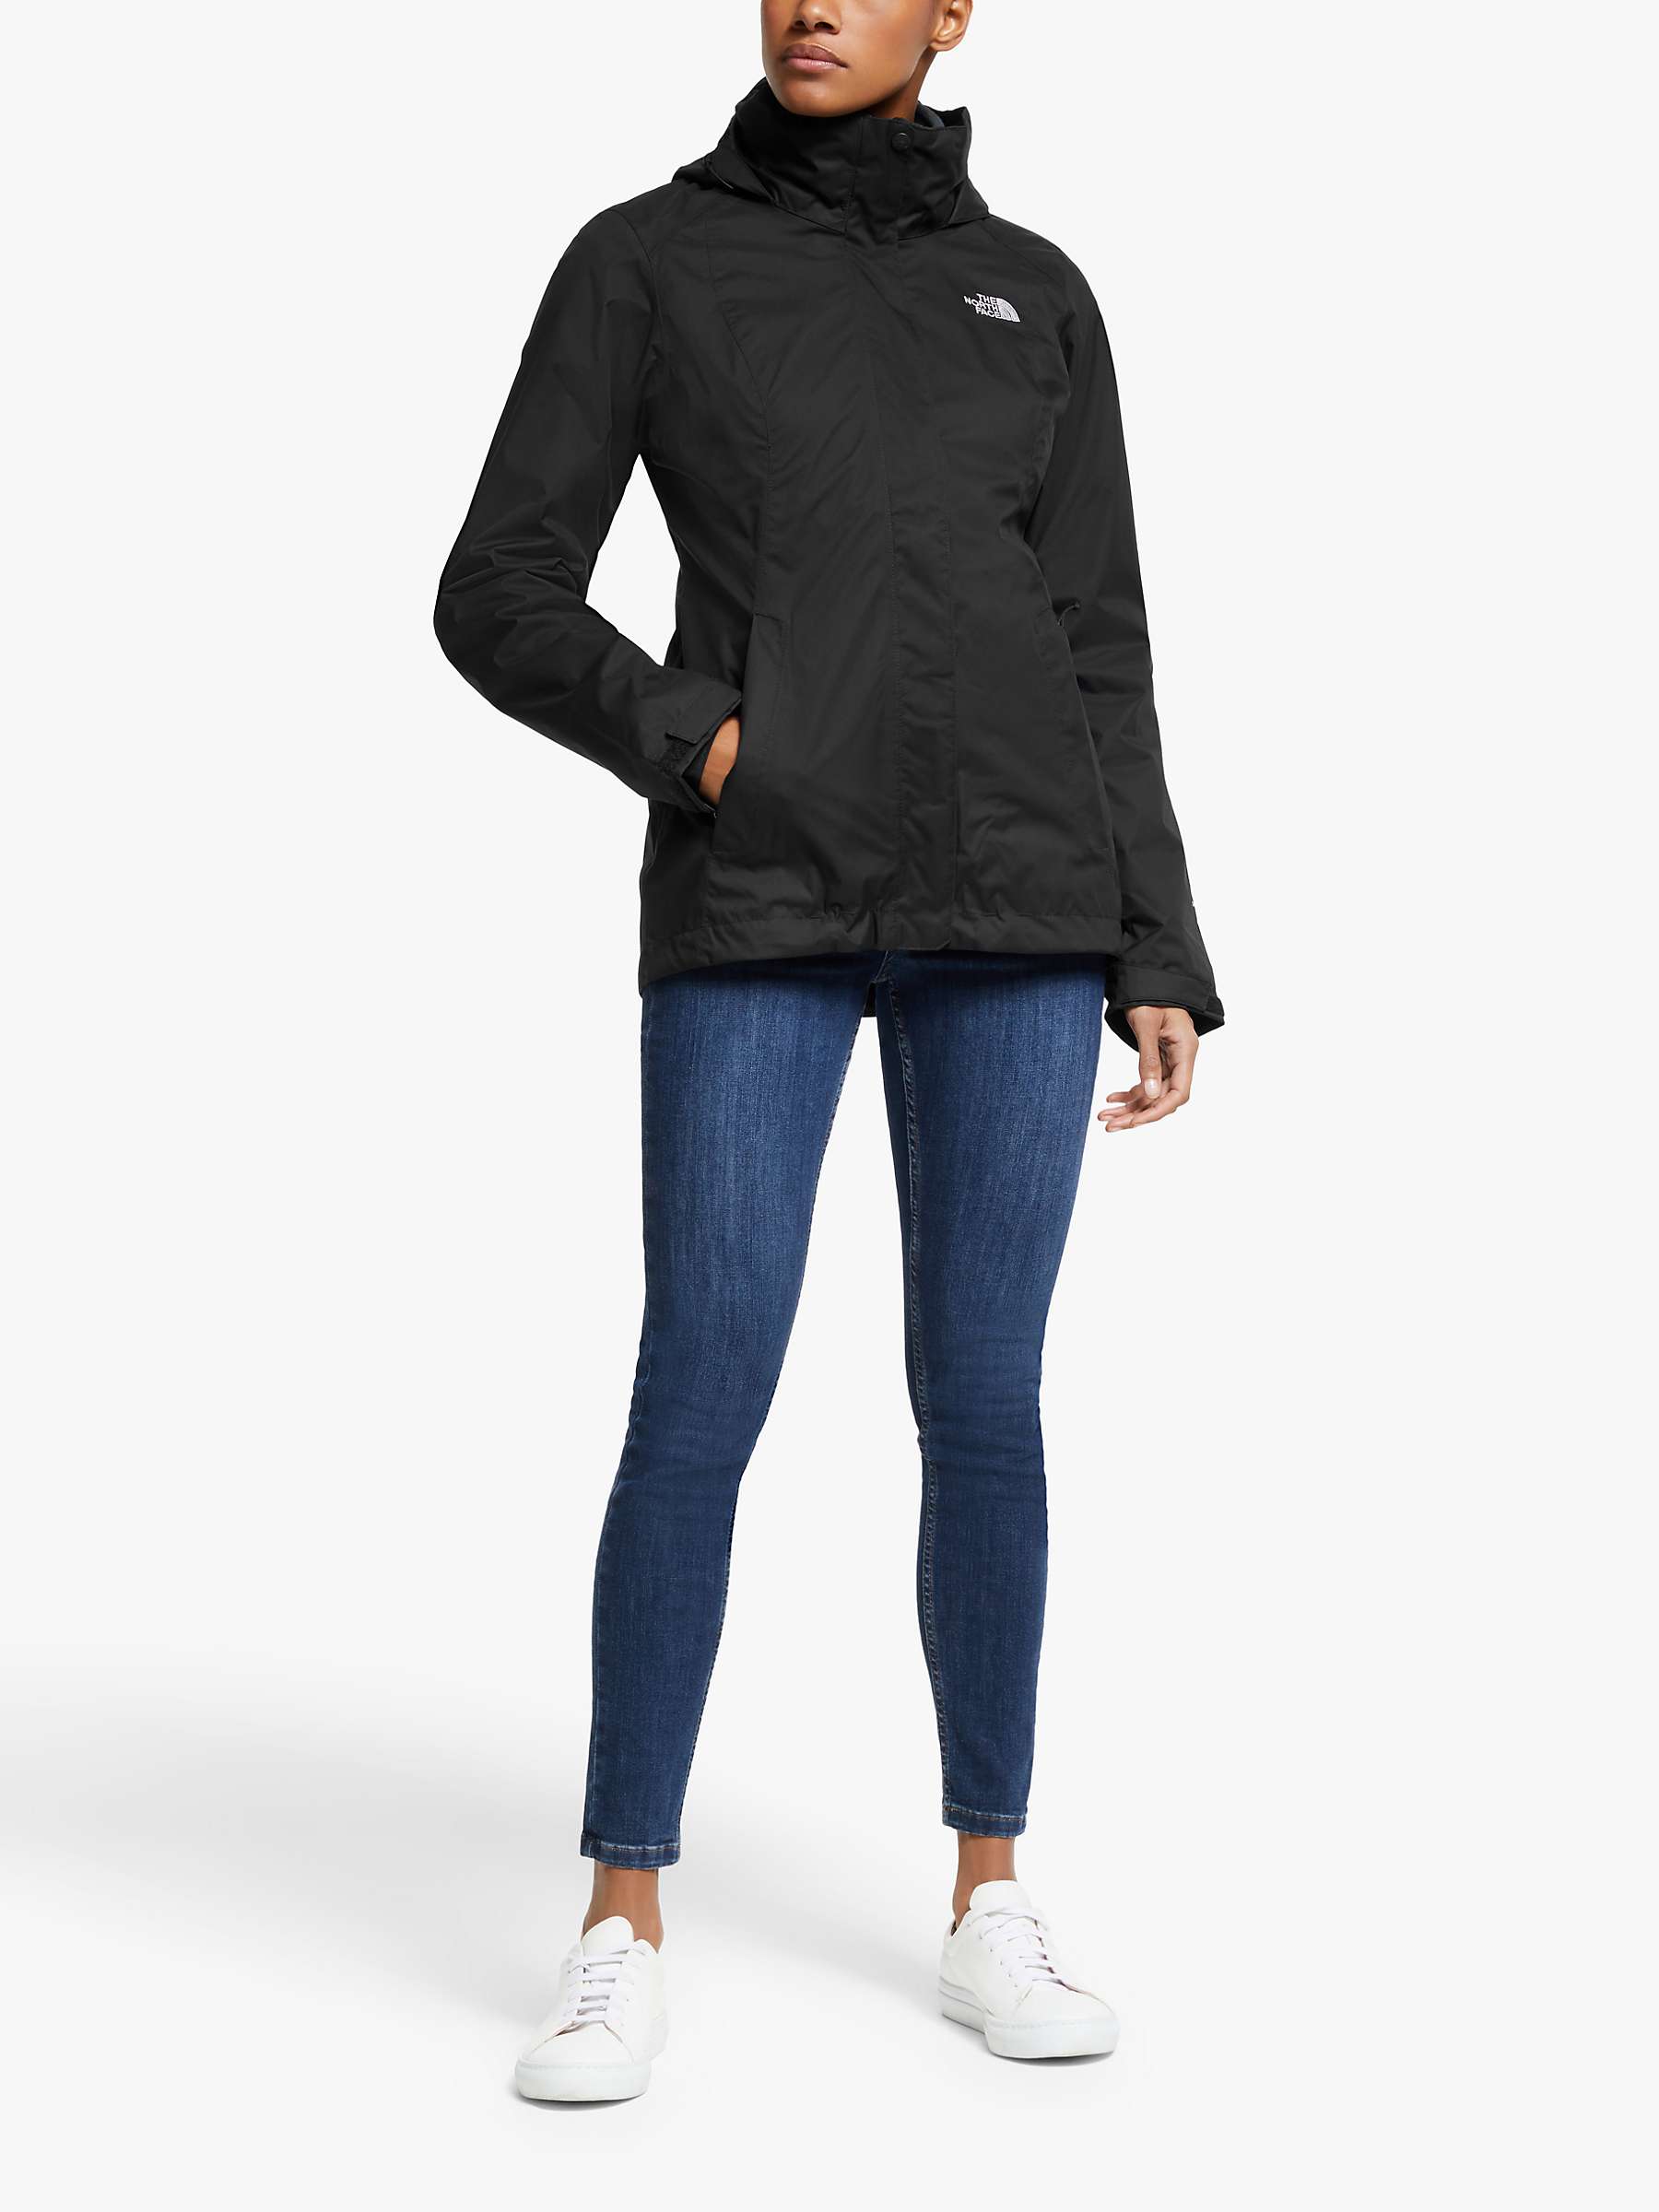 beetle Peddling Heading The North Face Evolve II Triclimate 3-in-1 Waterproof Women's Jacket, Black  at John Lewis & Partners